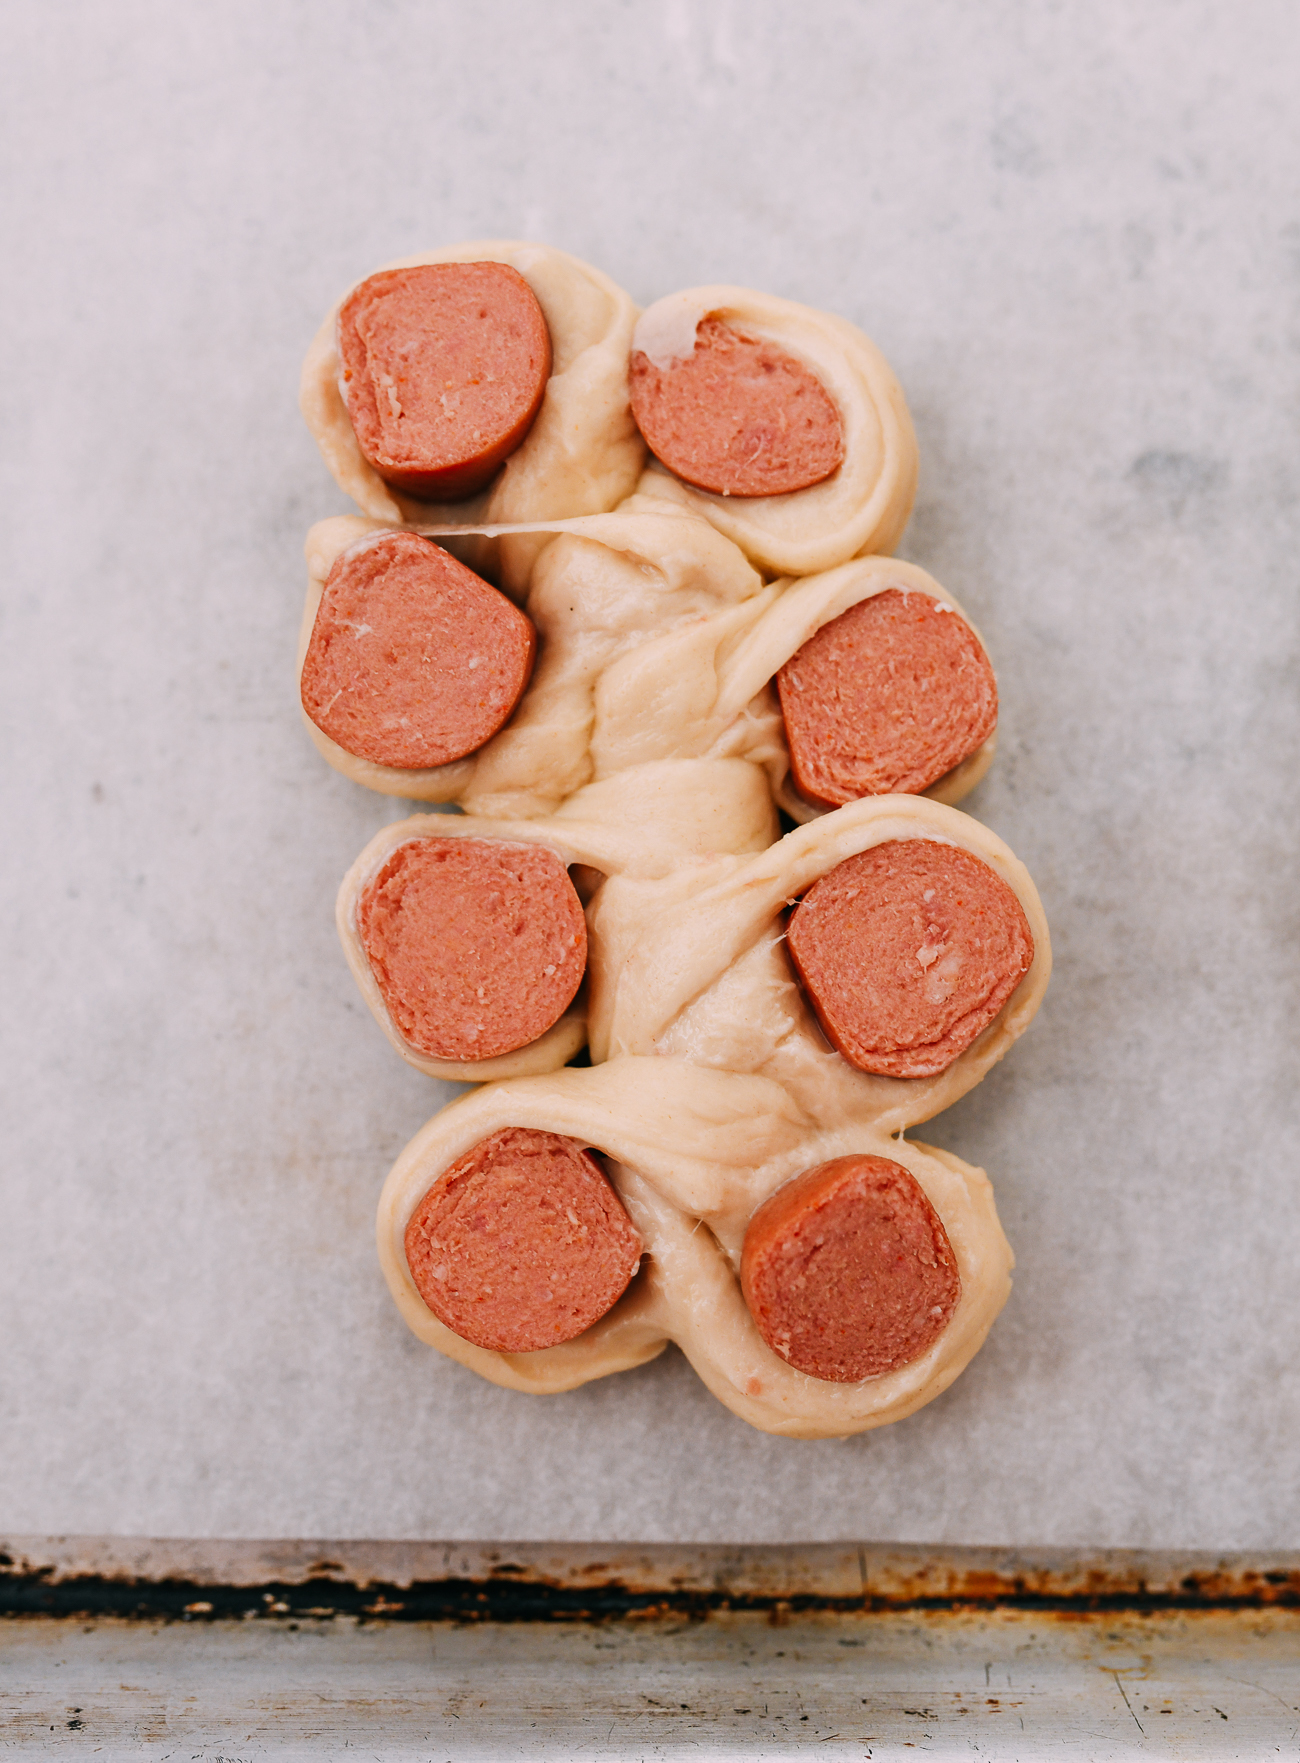 hot dog pieces cut side up on either side of uncut piece of dough